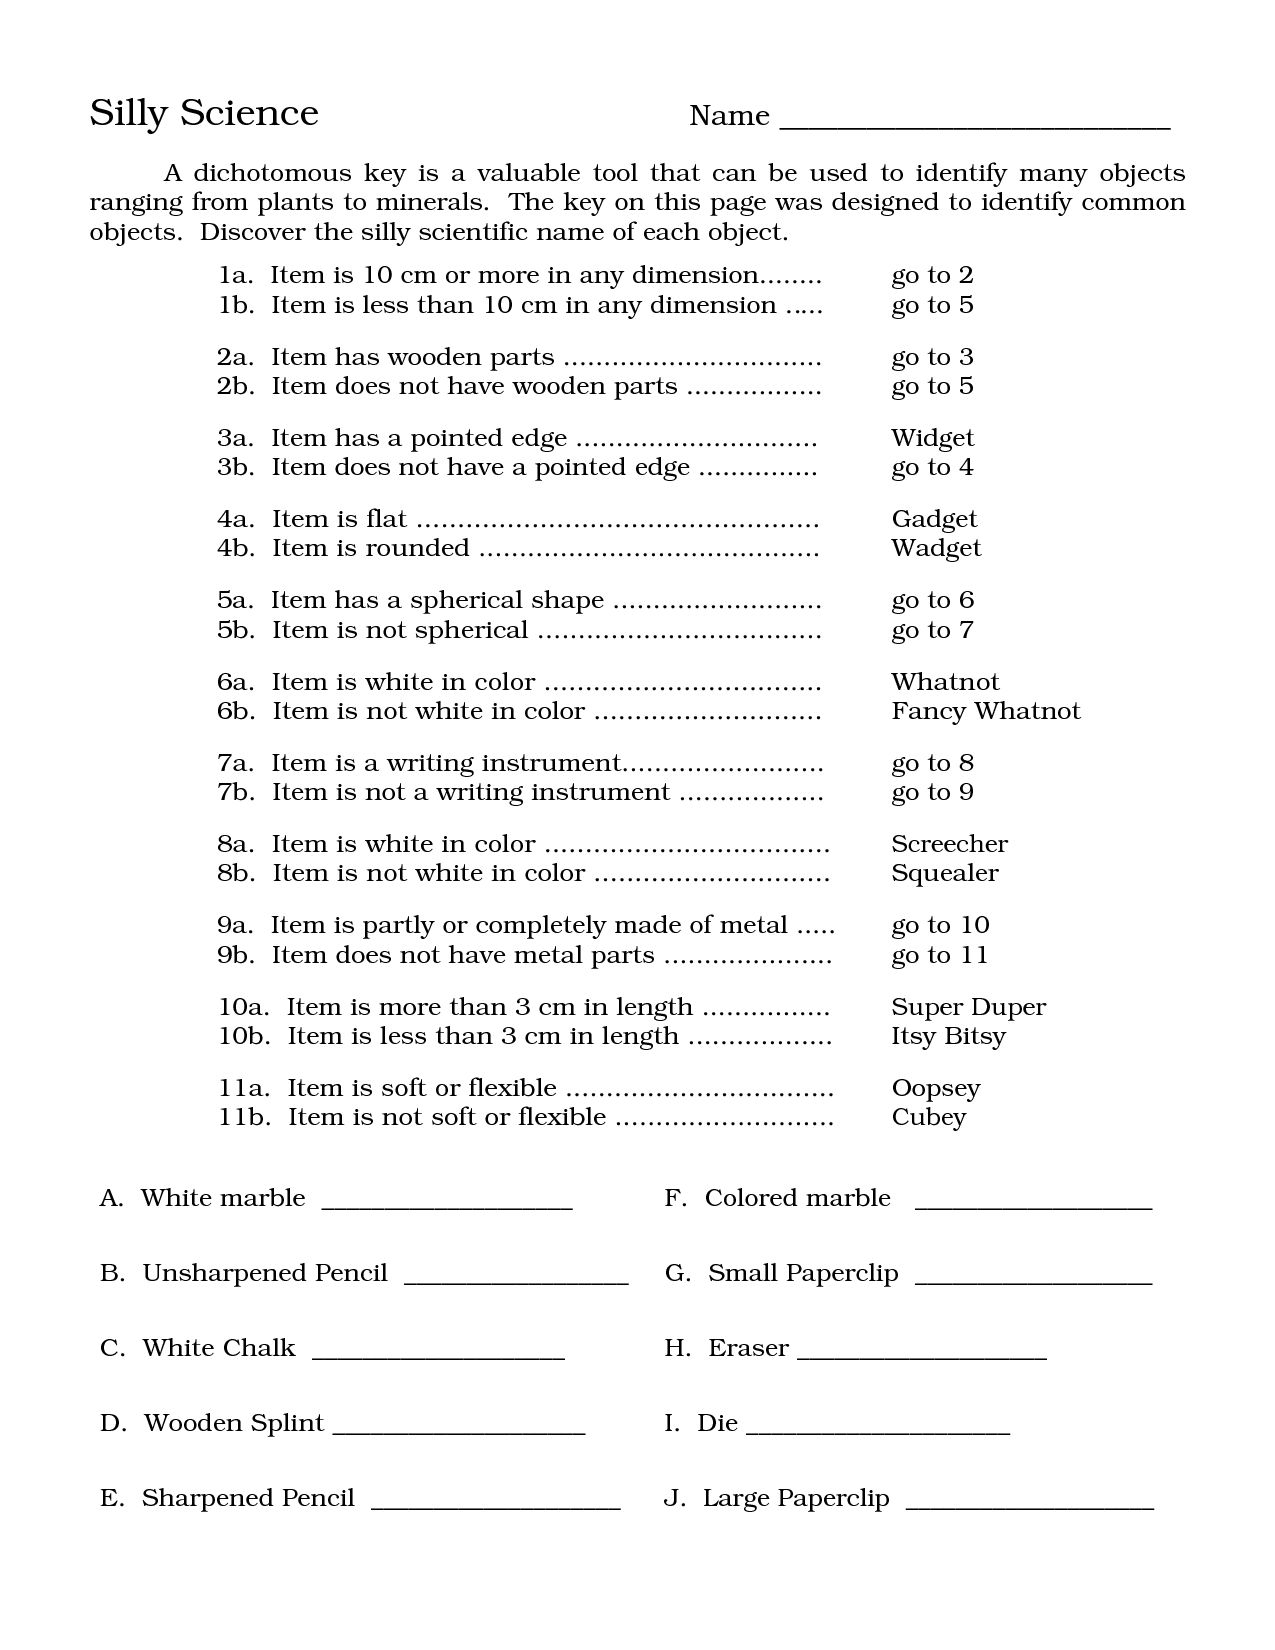 Virtual Hip Replacement Surgery Worksheet Answers